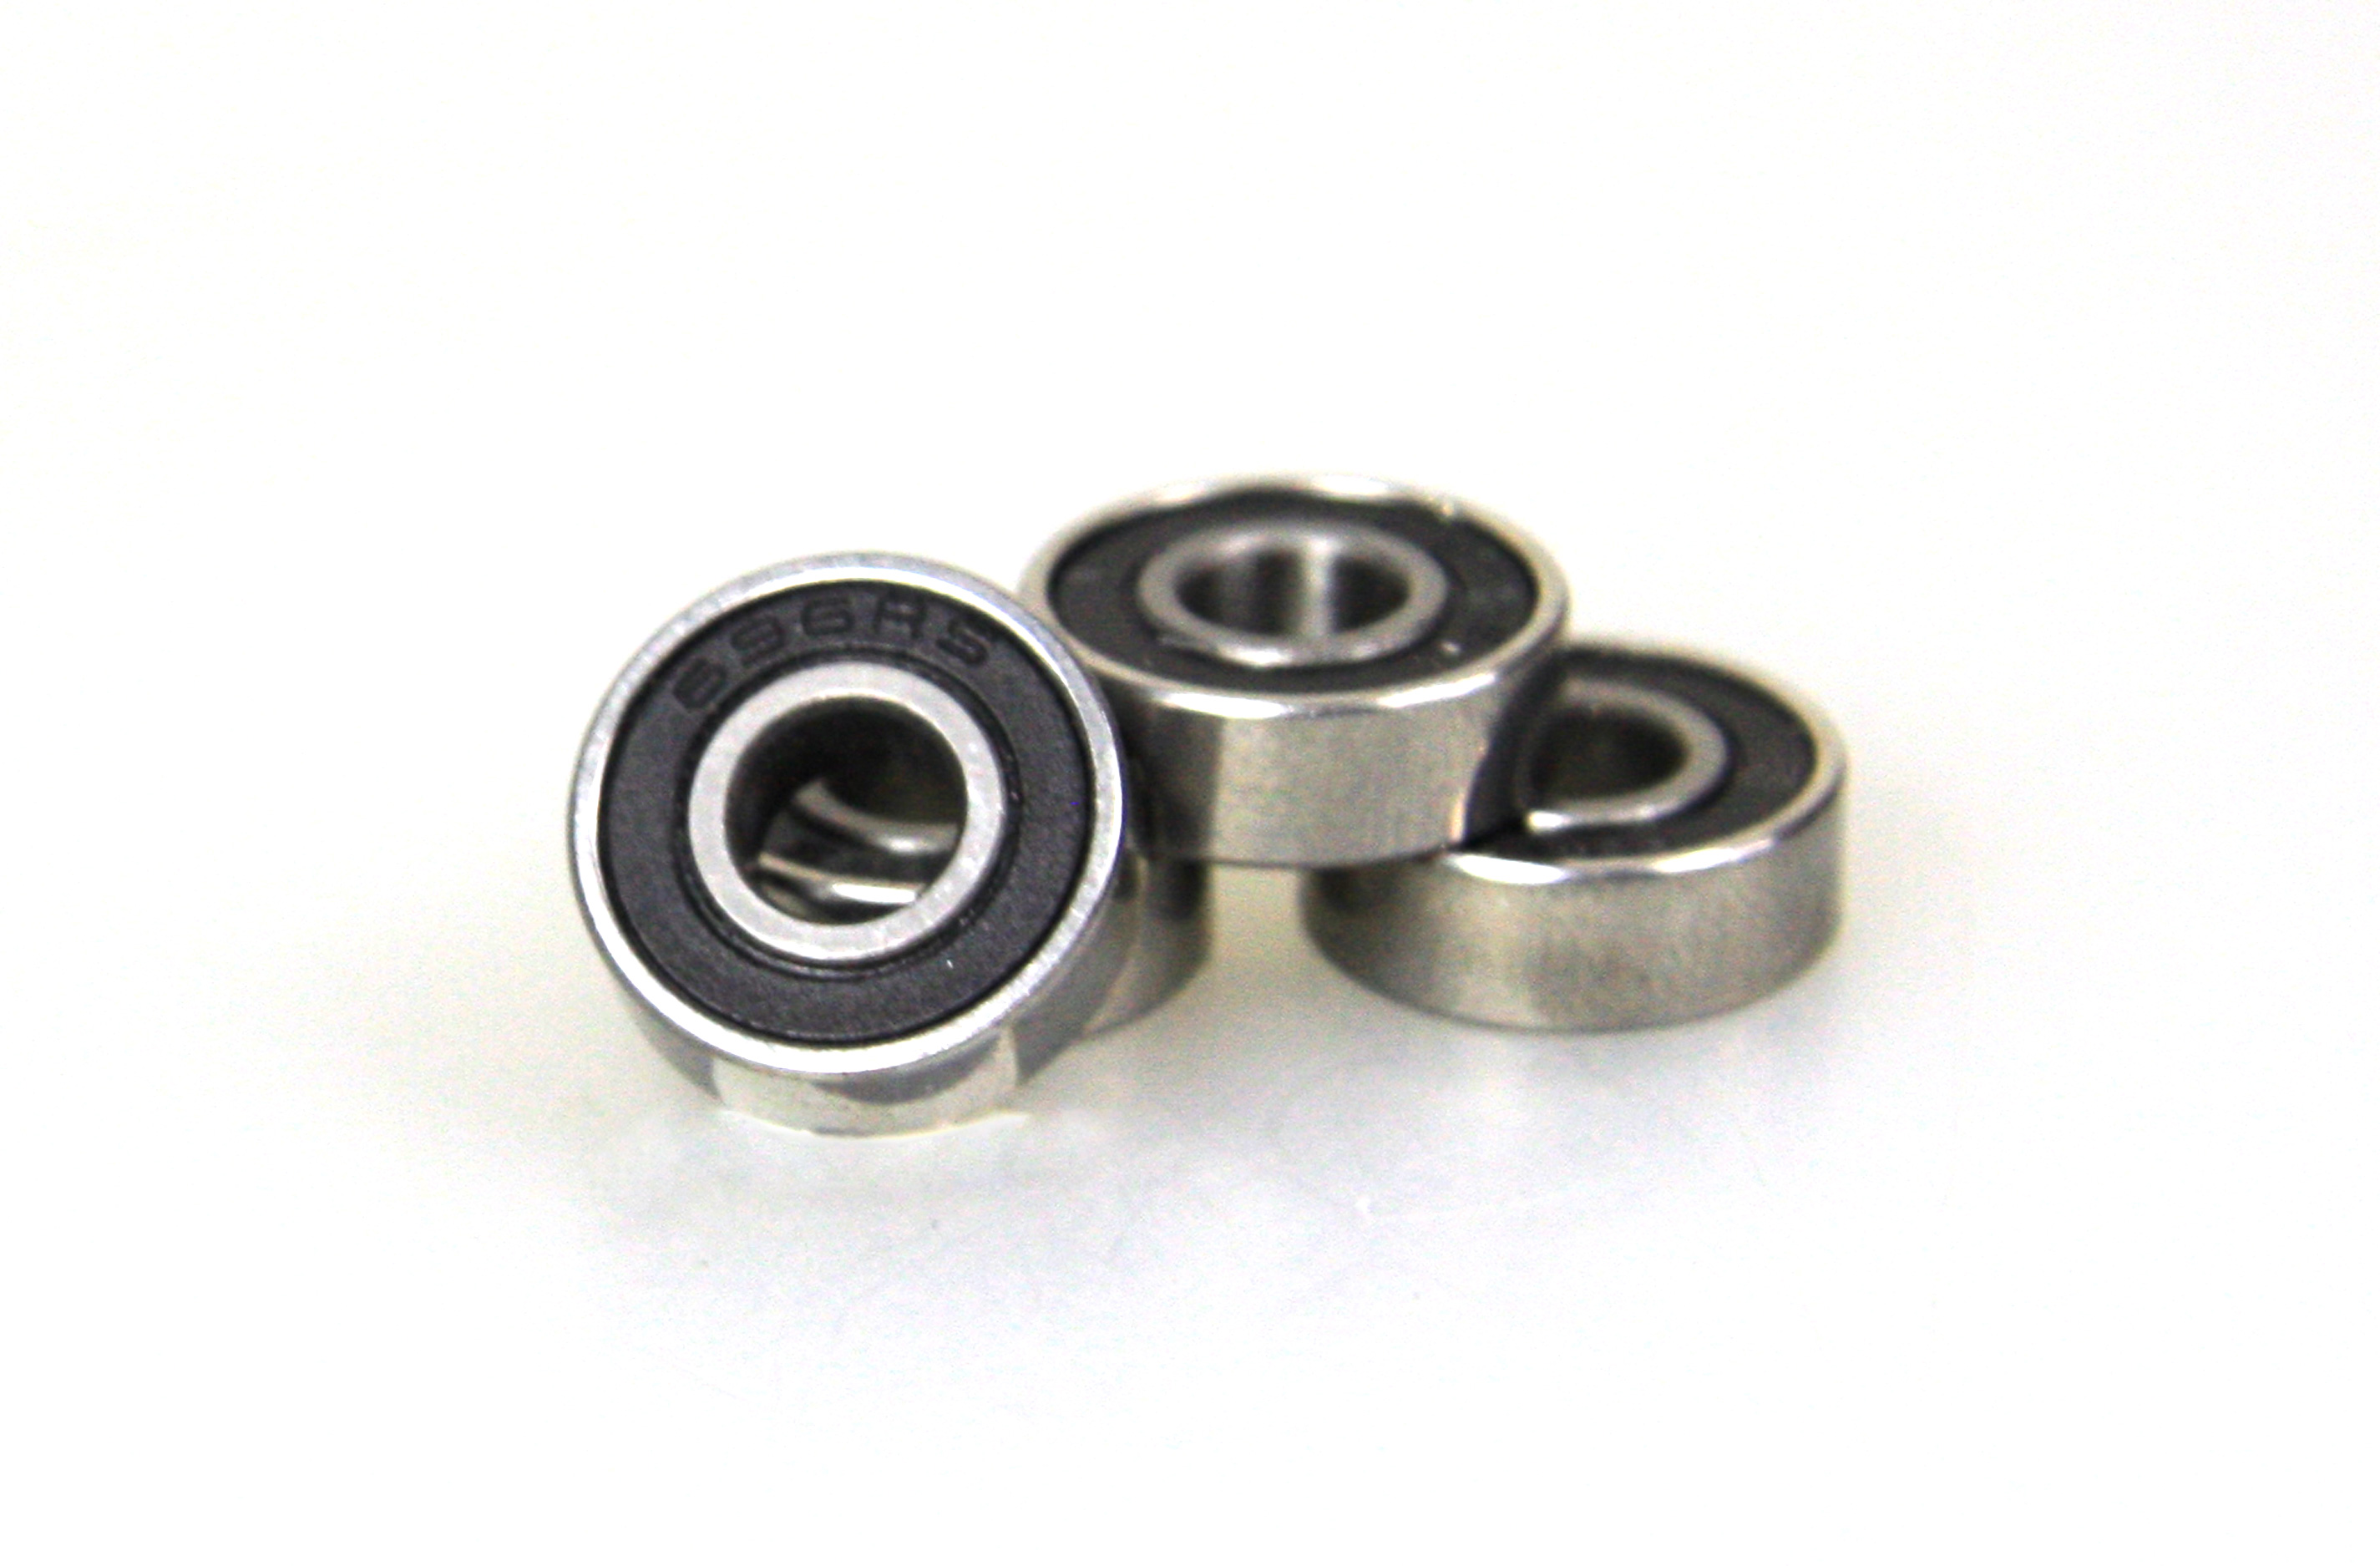 y0461 Ceramic - Hybrid bearings for FG 4WD front axle housing, 1 pcs.